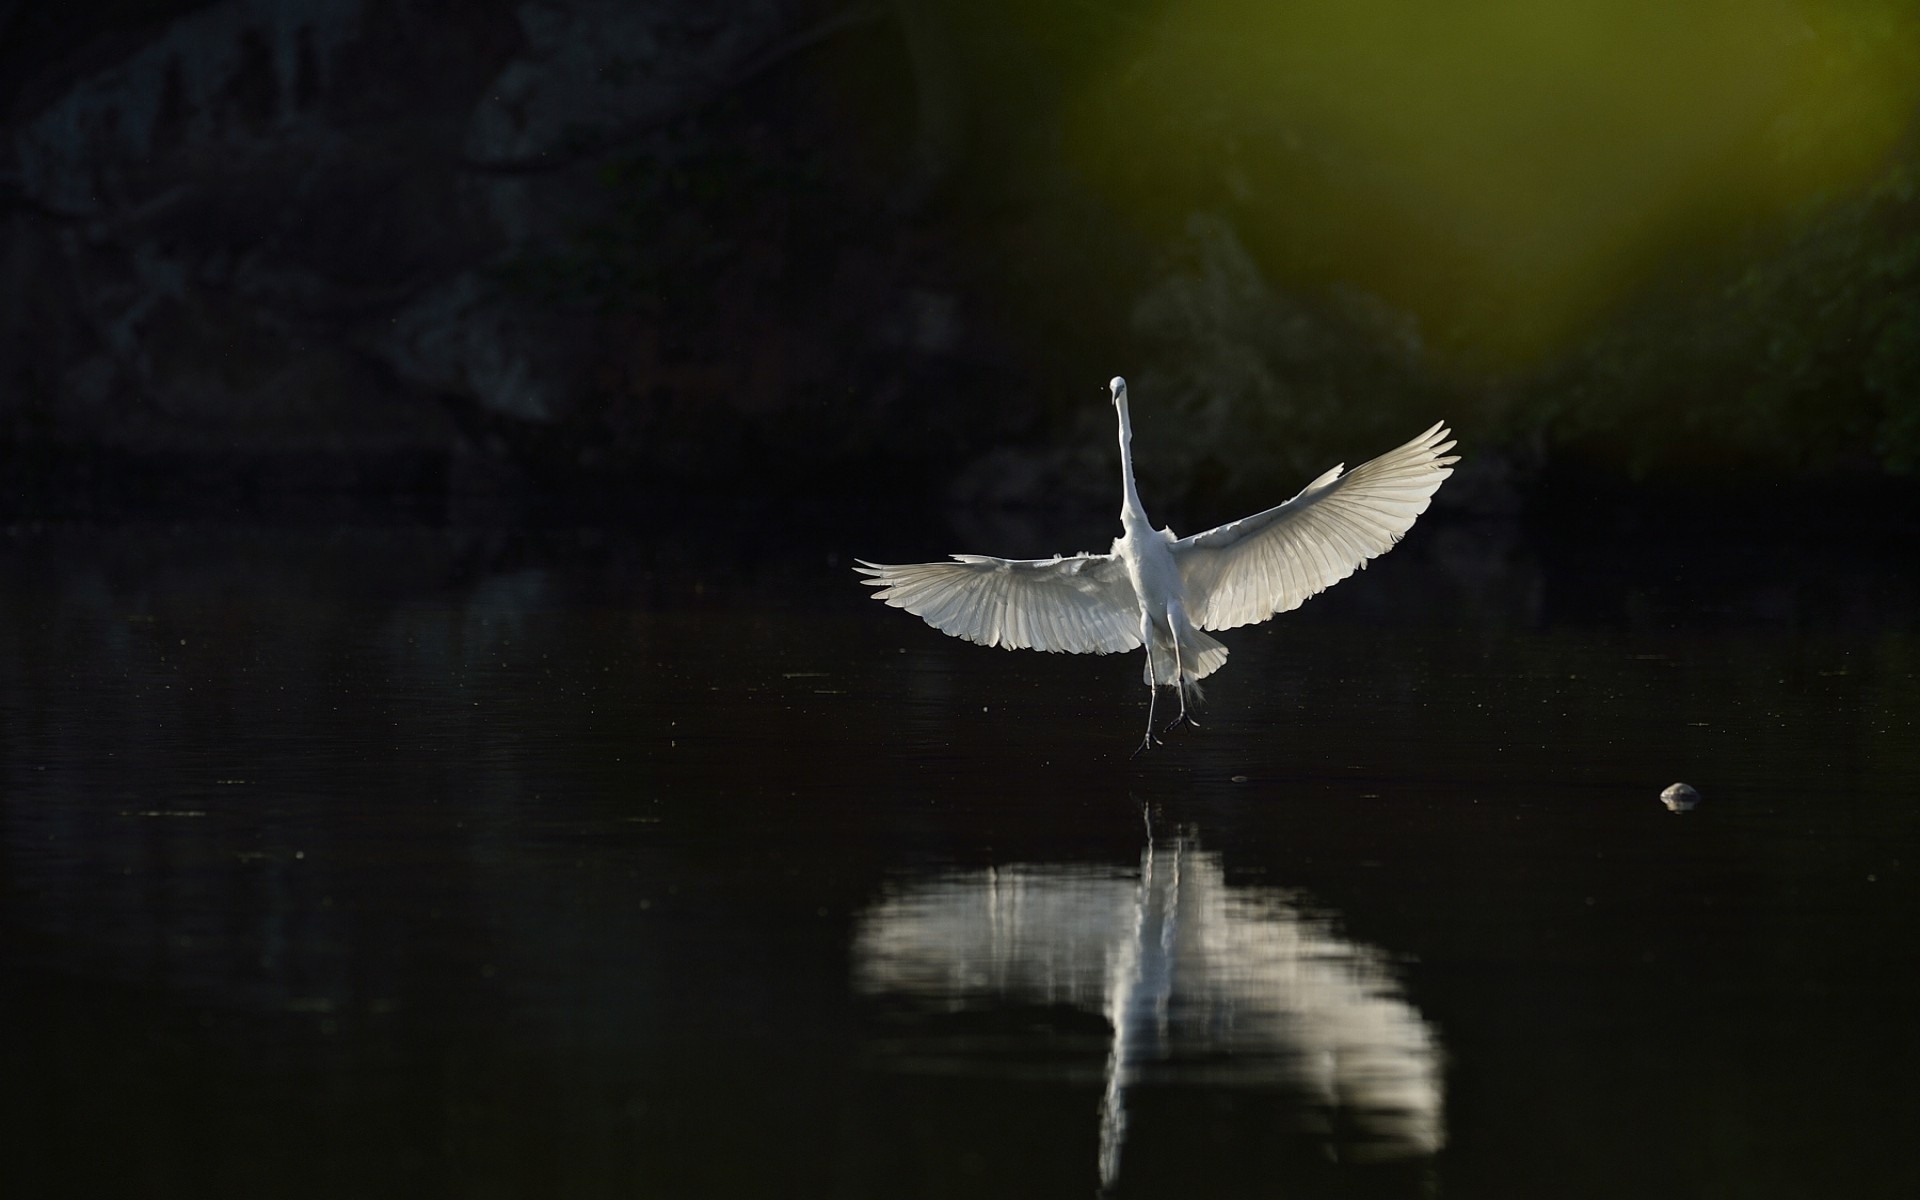 General 1920x1200 animals herons birds nature outdoors wings water reflection